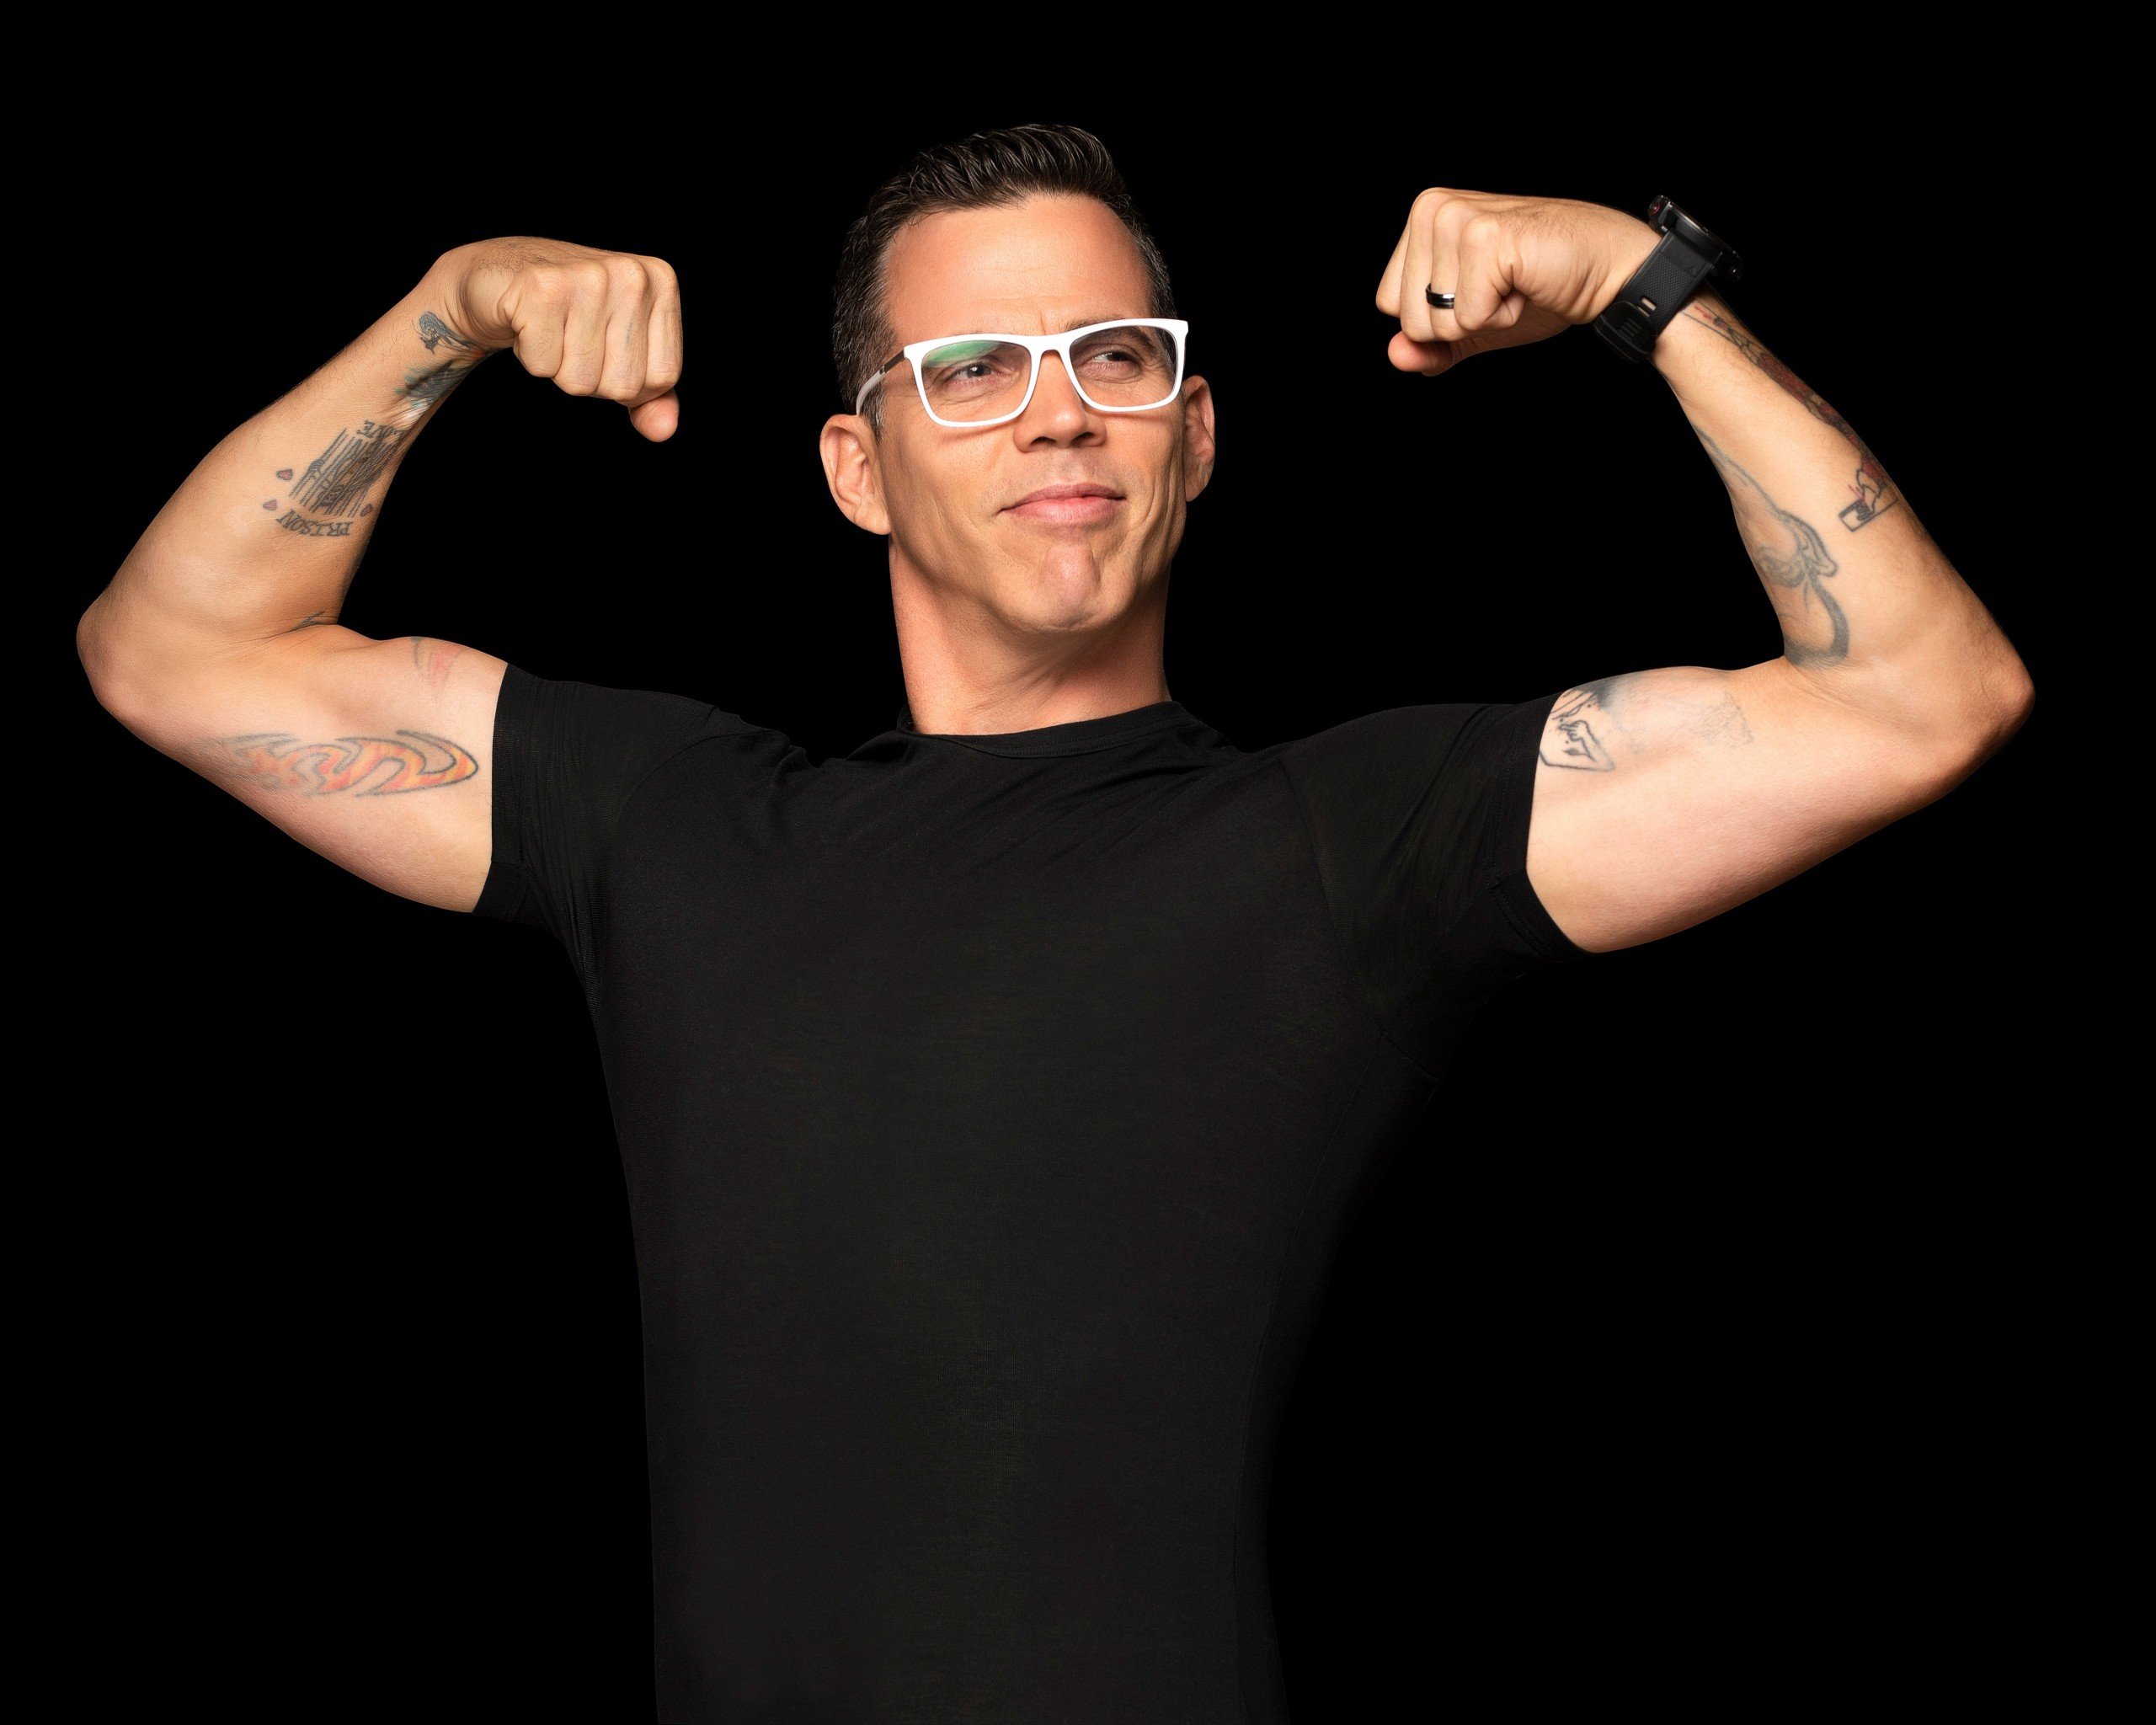 Jackass 5 to Feature 45 Minutes of Steve-O Attempting a Pokemon